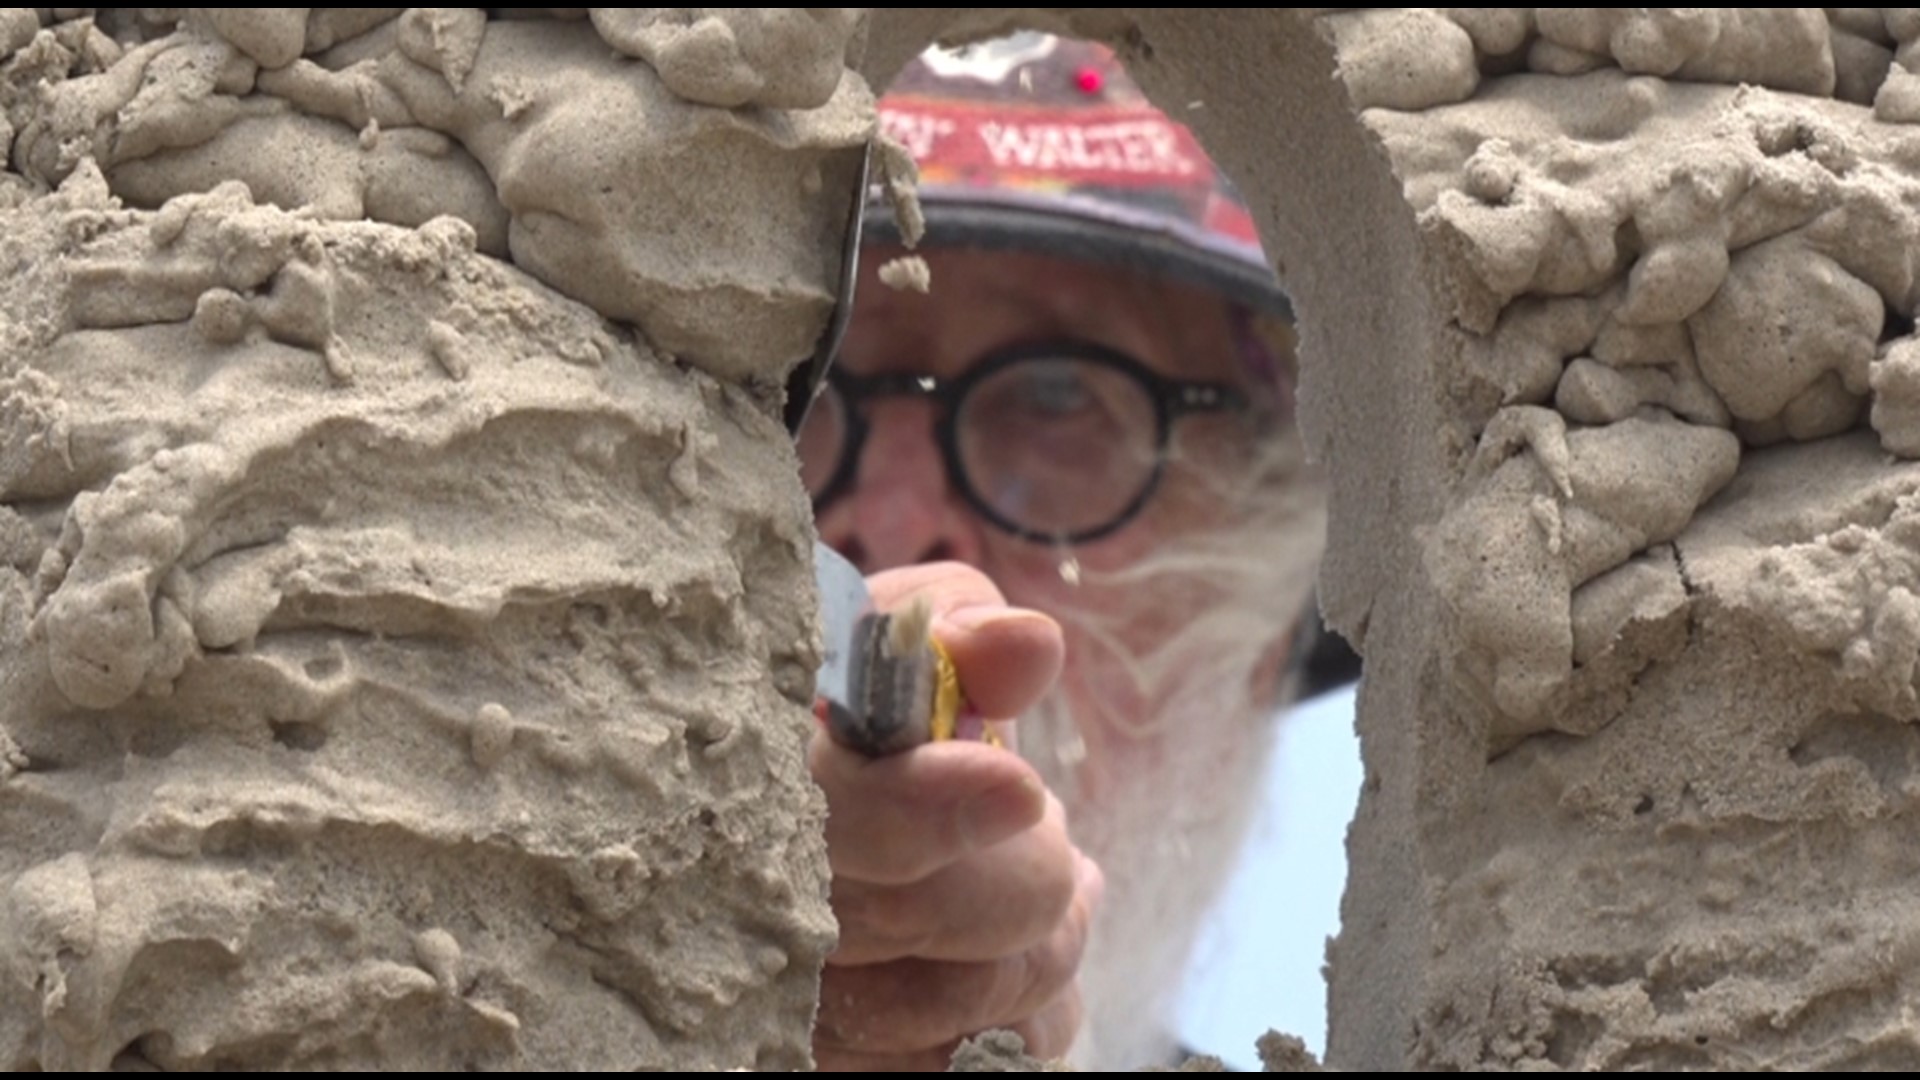 Stop by Texas SandFest at Mustang Island starting at 9 a.m. everyday until Sunday.